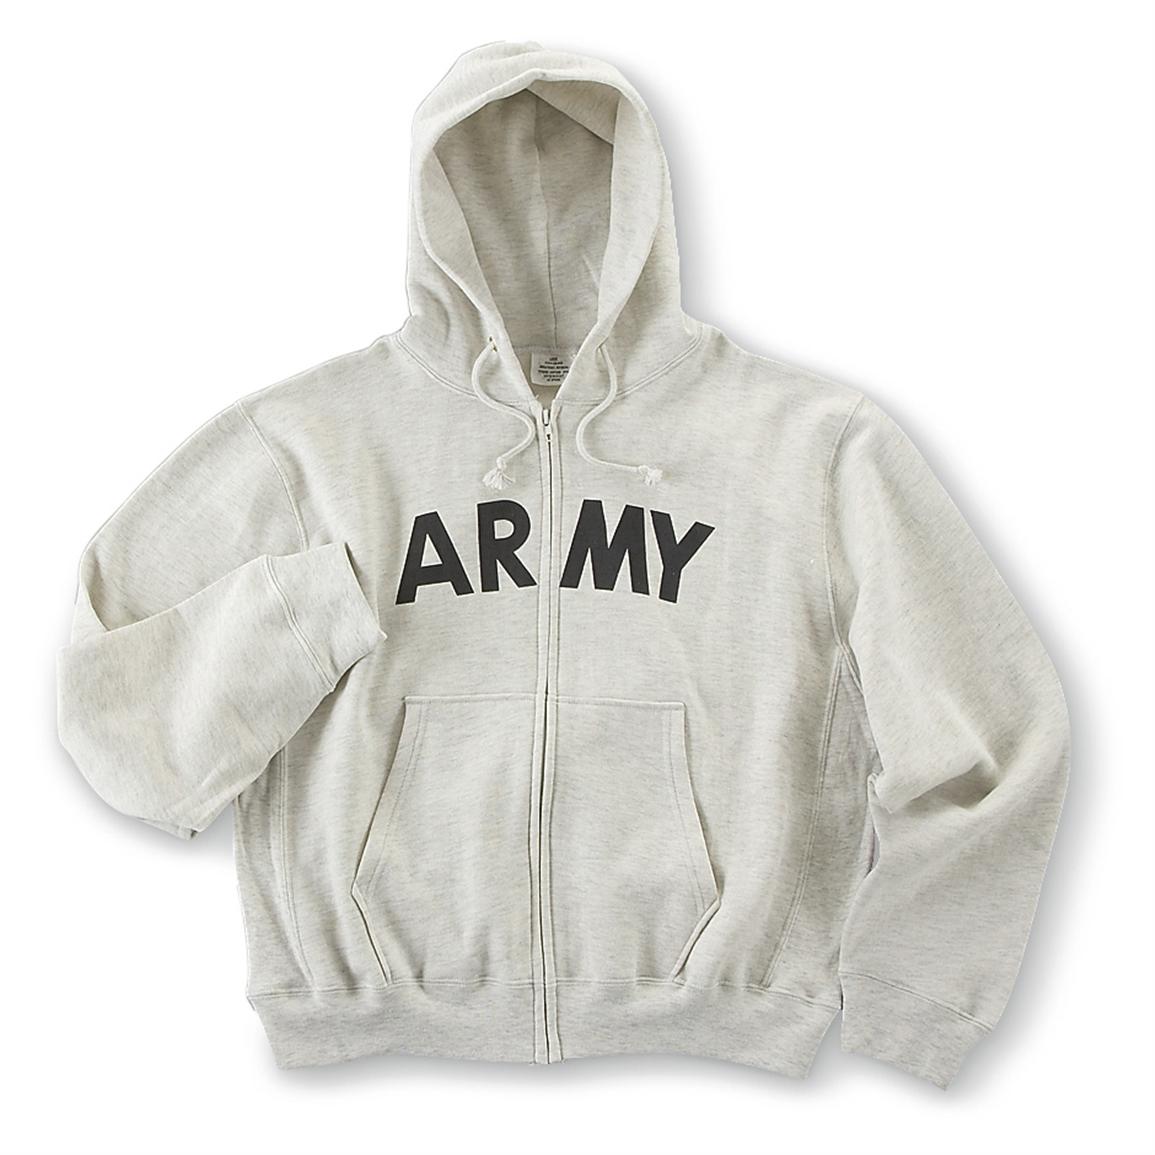 New U.S. Military - issue Zip - front Army Hoodie, Light Gray - 171886